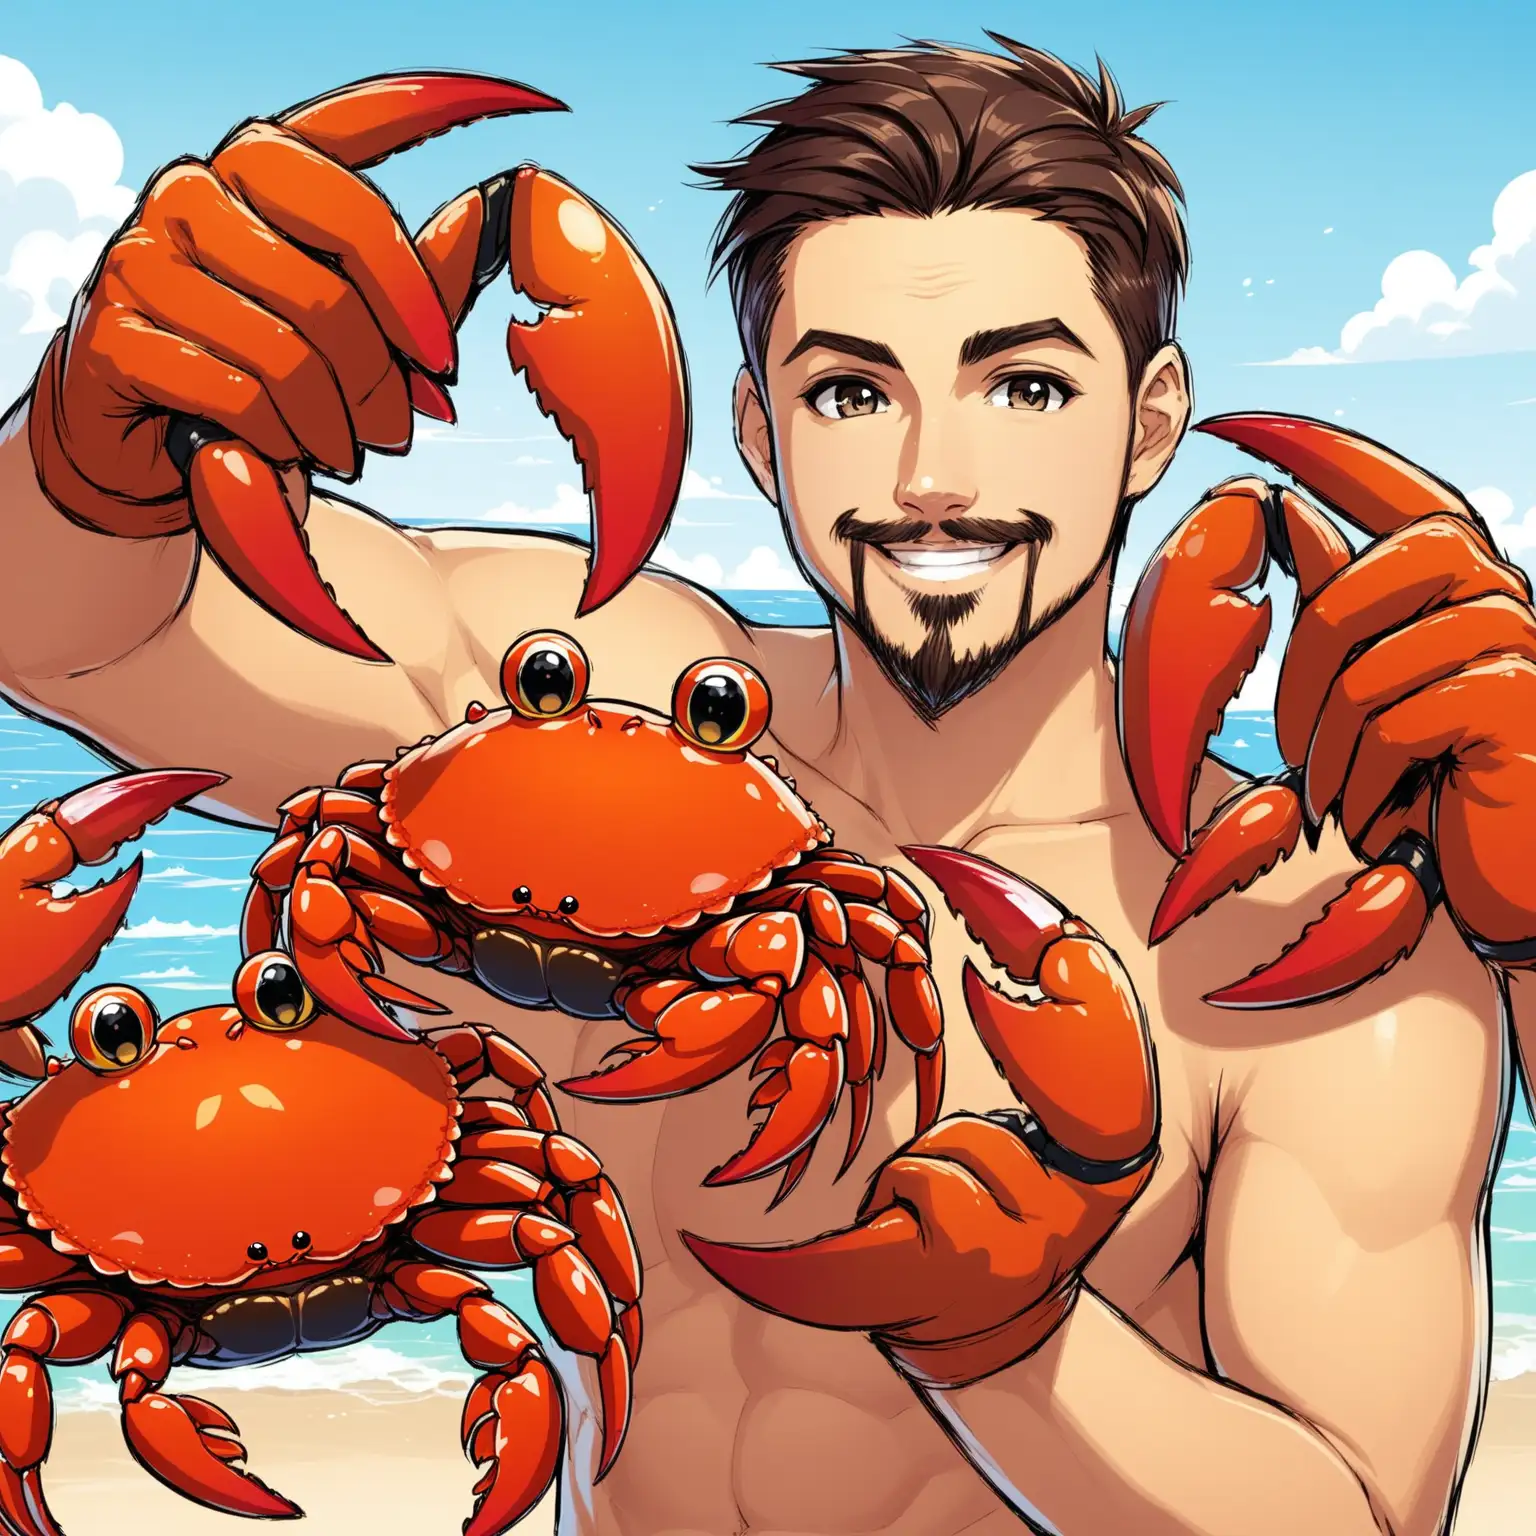 Ryan from Canada with a goatee giving his friends crabs